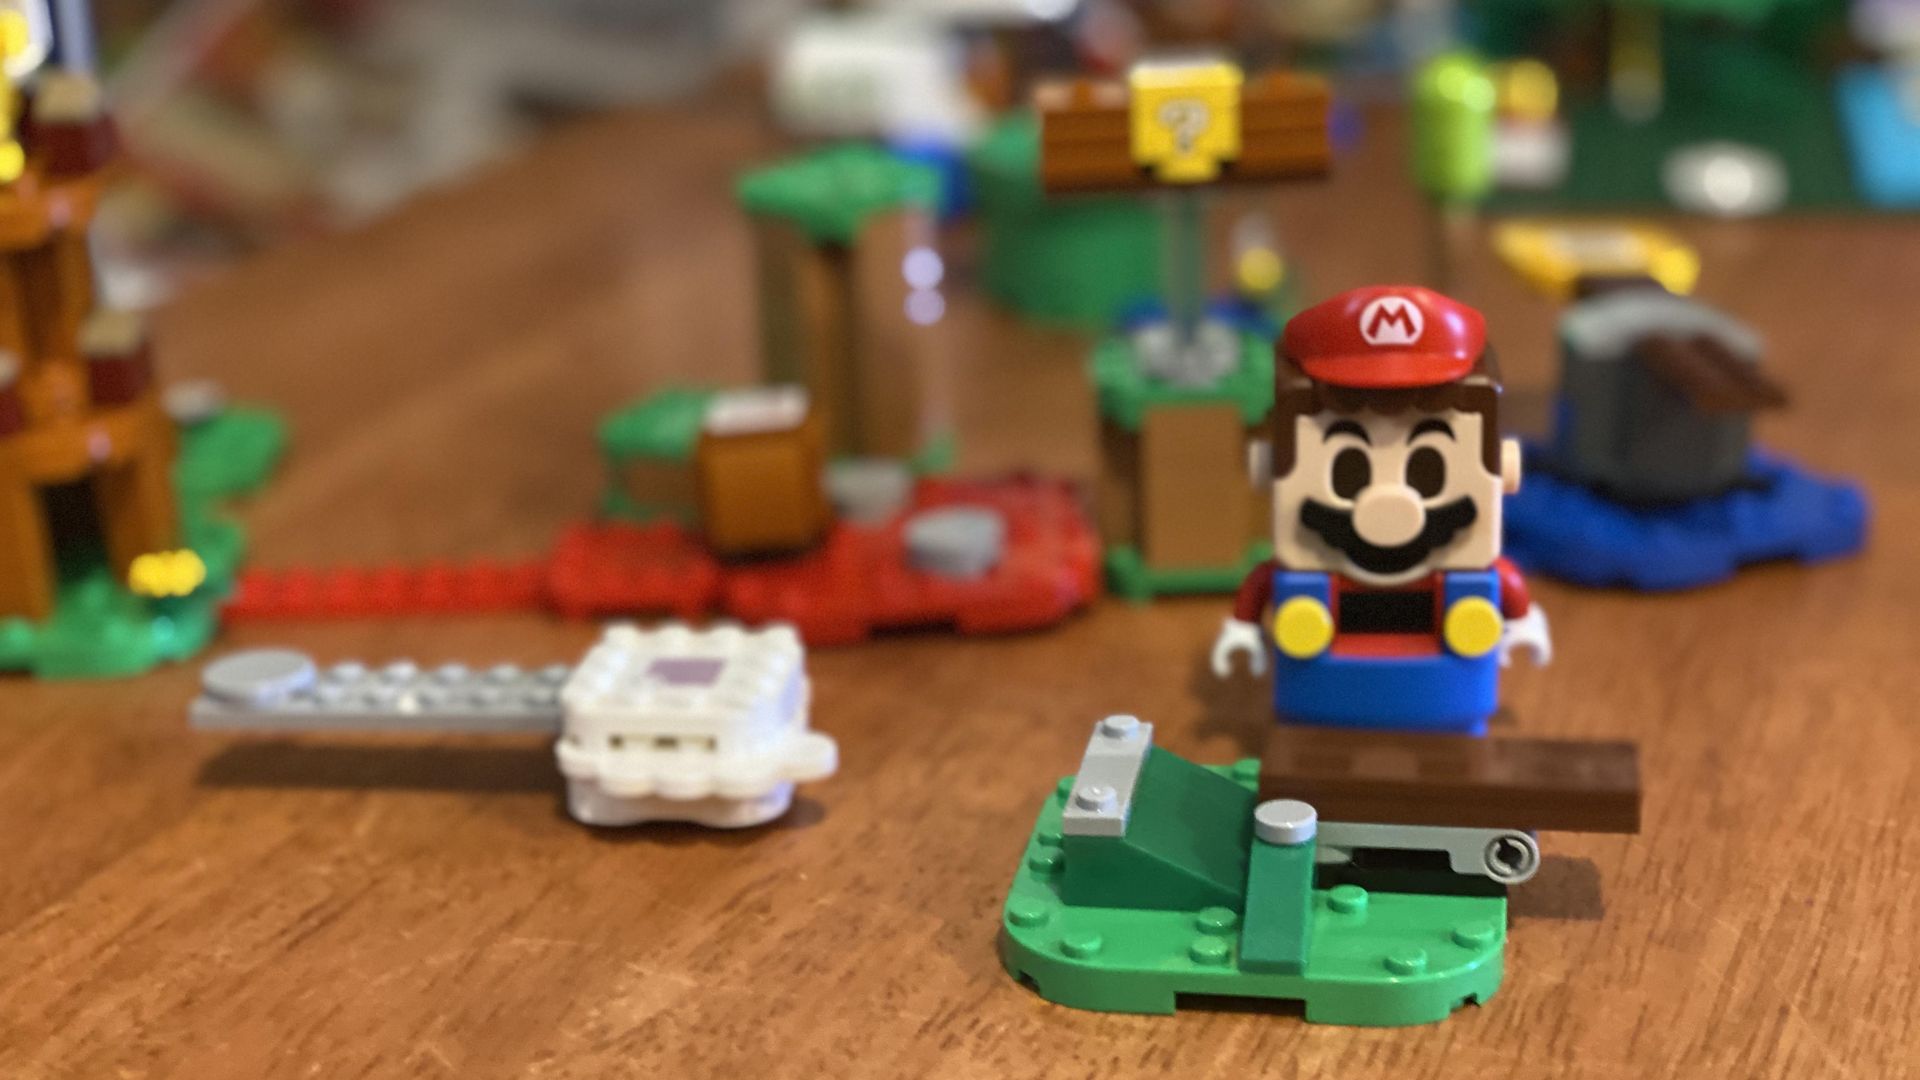 A close-up photo of the Lego Mario figure and various other pieces from the set.